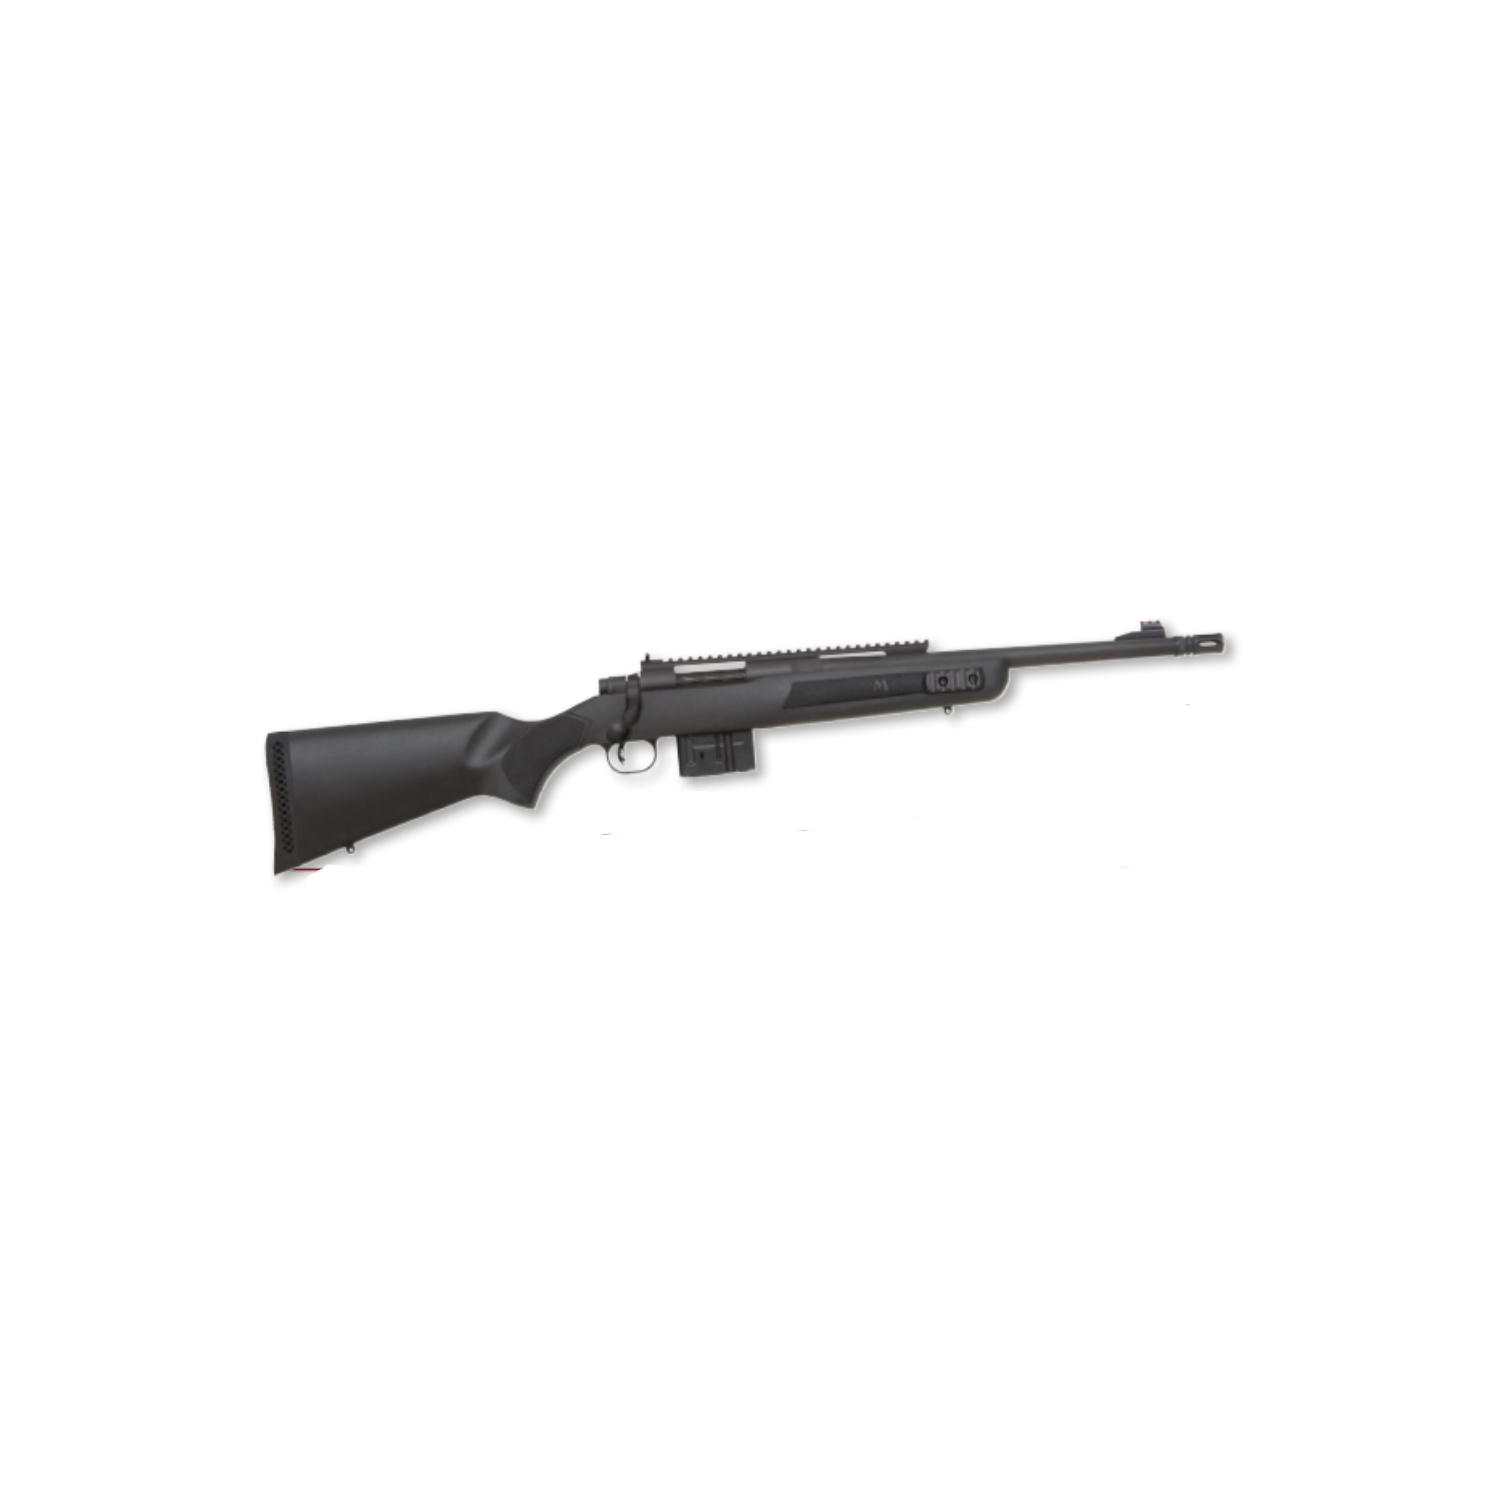 Mossberg Modell MVP Scout Carbine